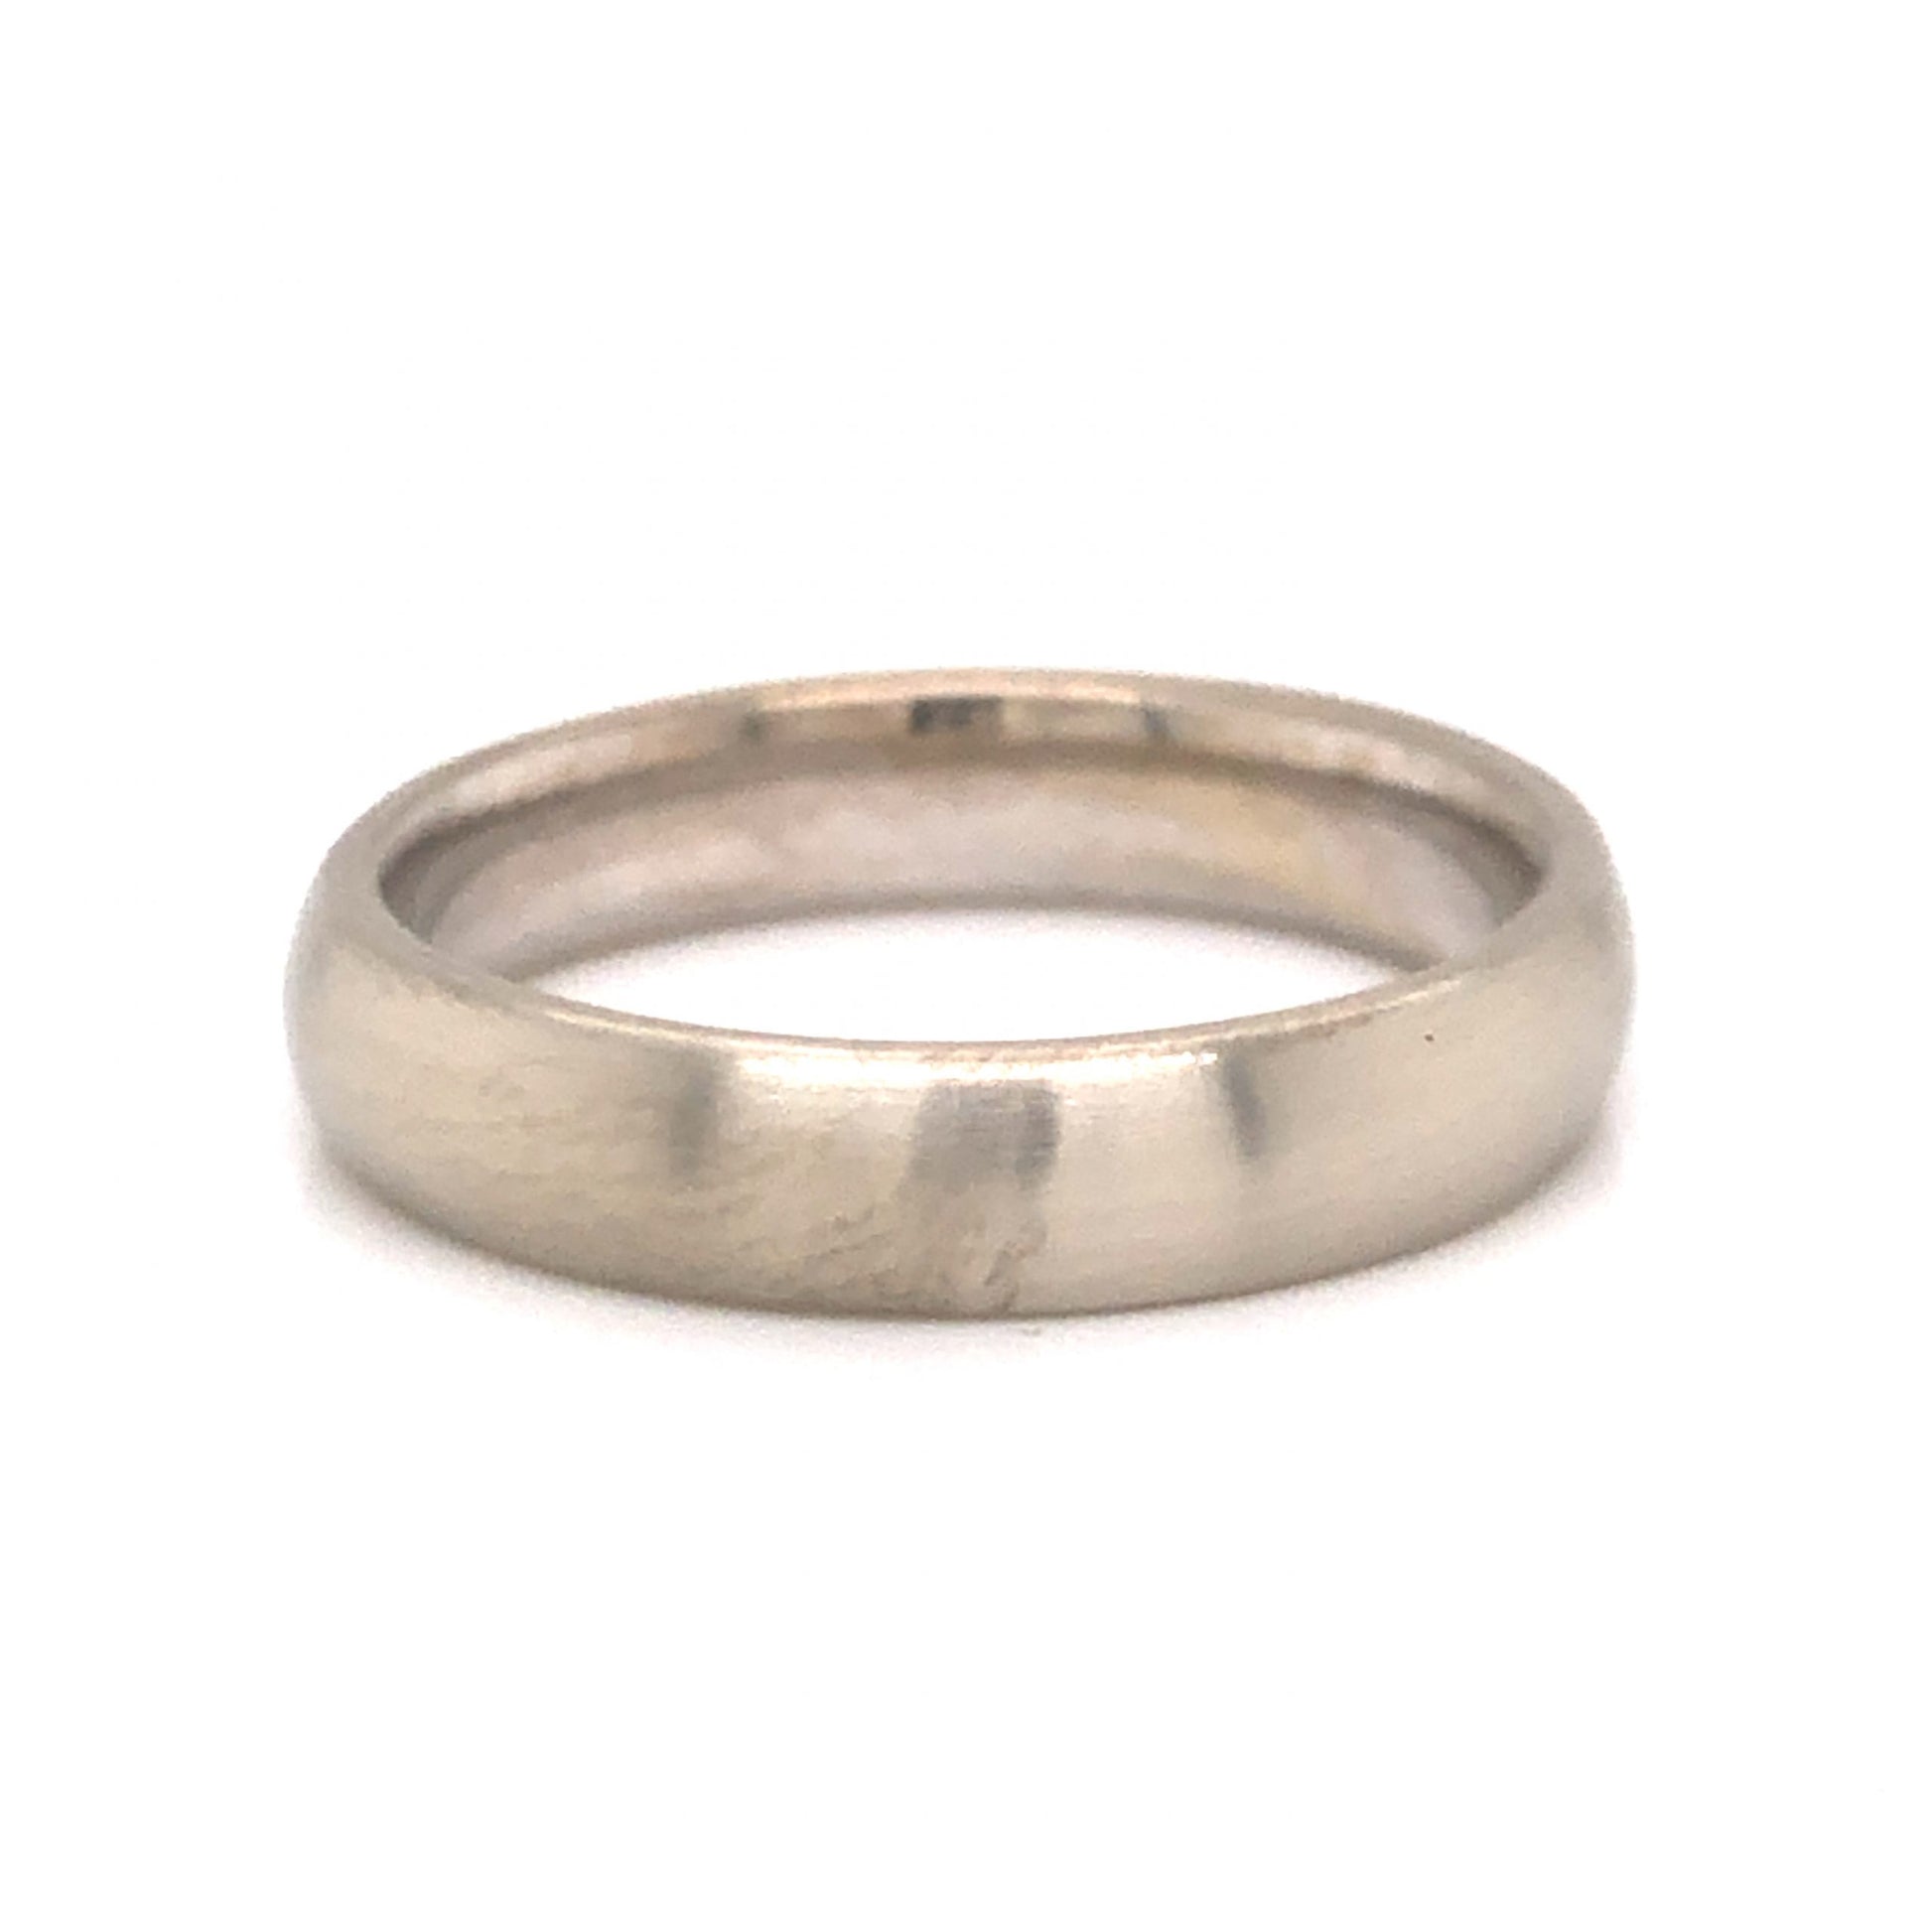 4.02mm Comfort Fit Wedding Band in 18k White Gold